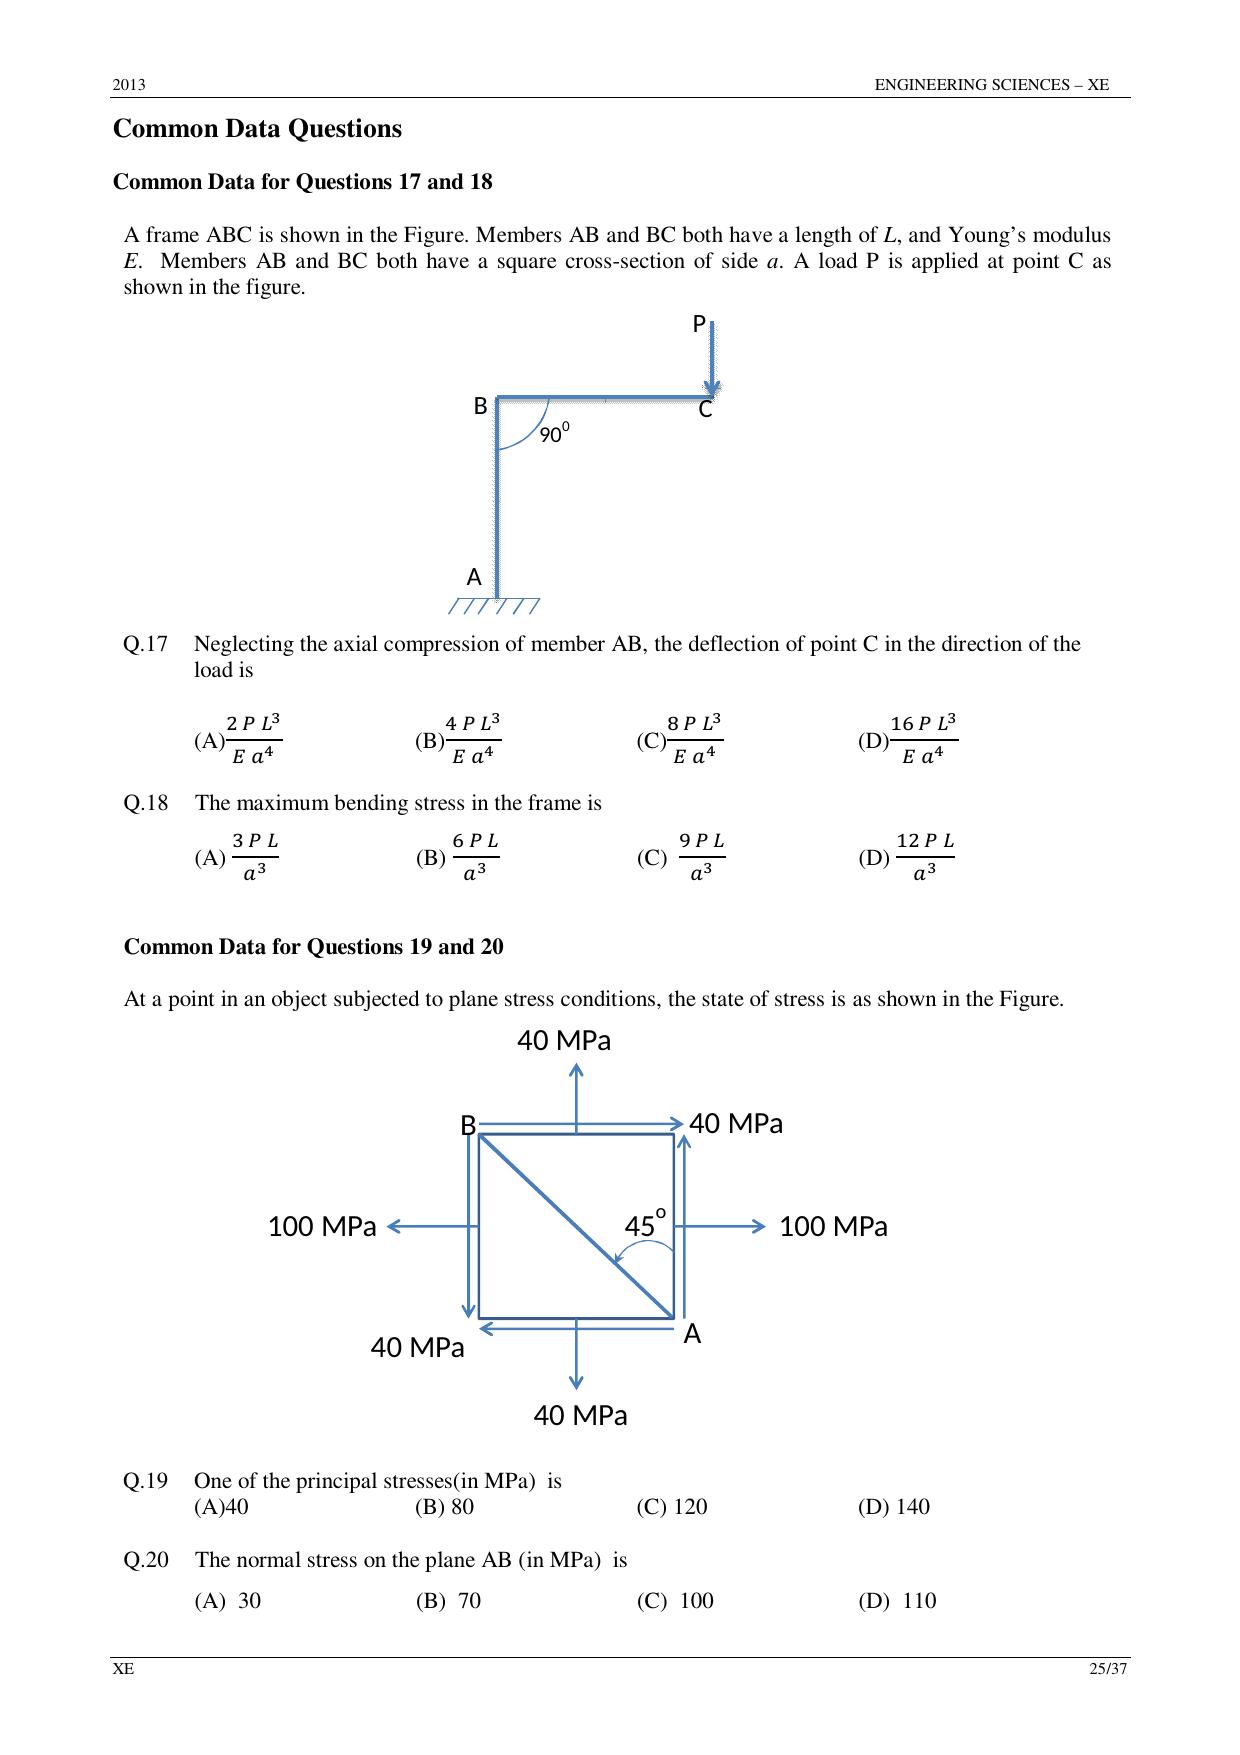 GATE 2013 Engineering Sciences (XE) Question Paper with Answer Key - Page 25